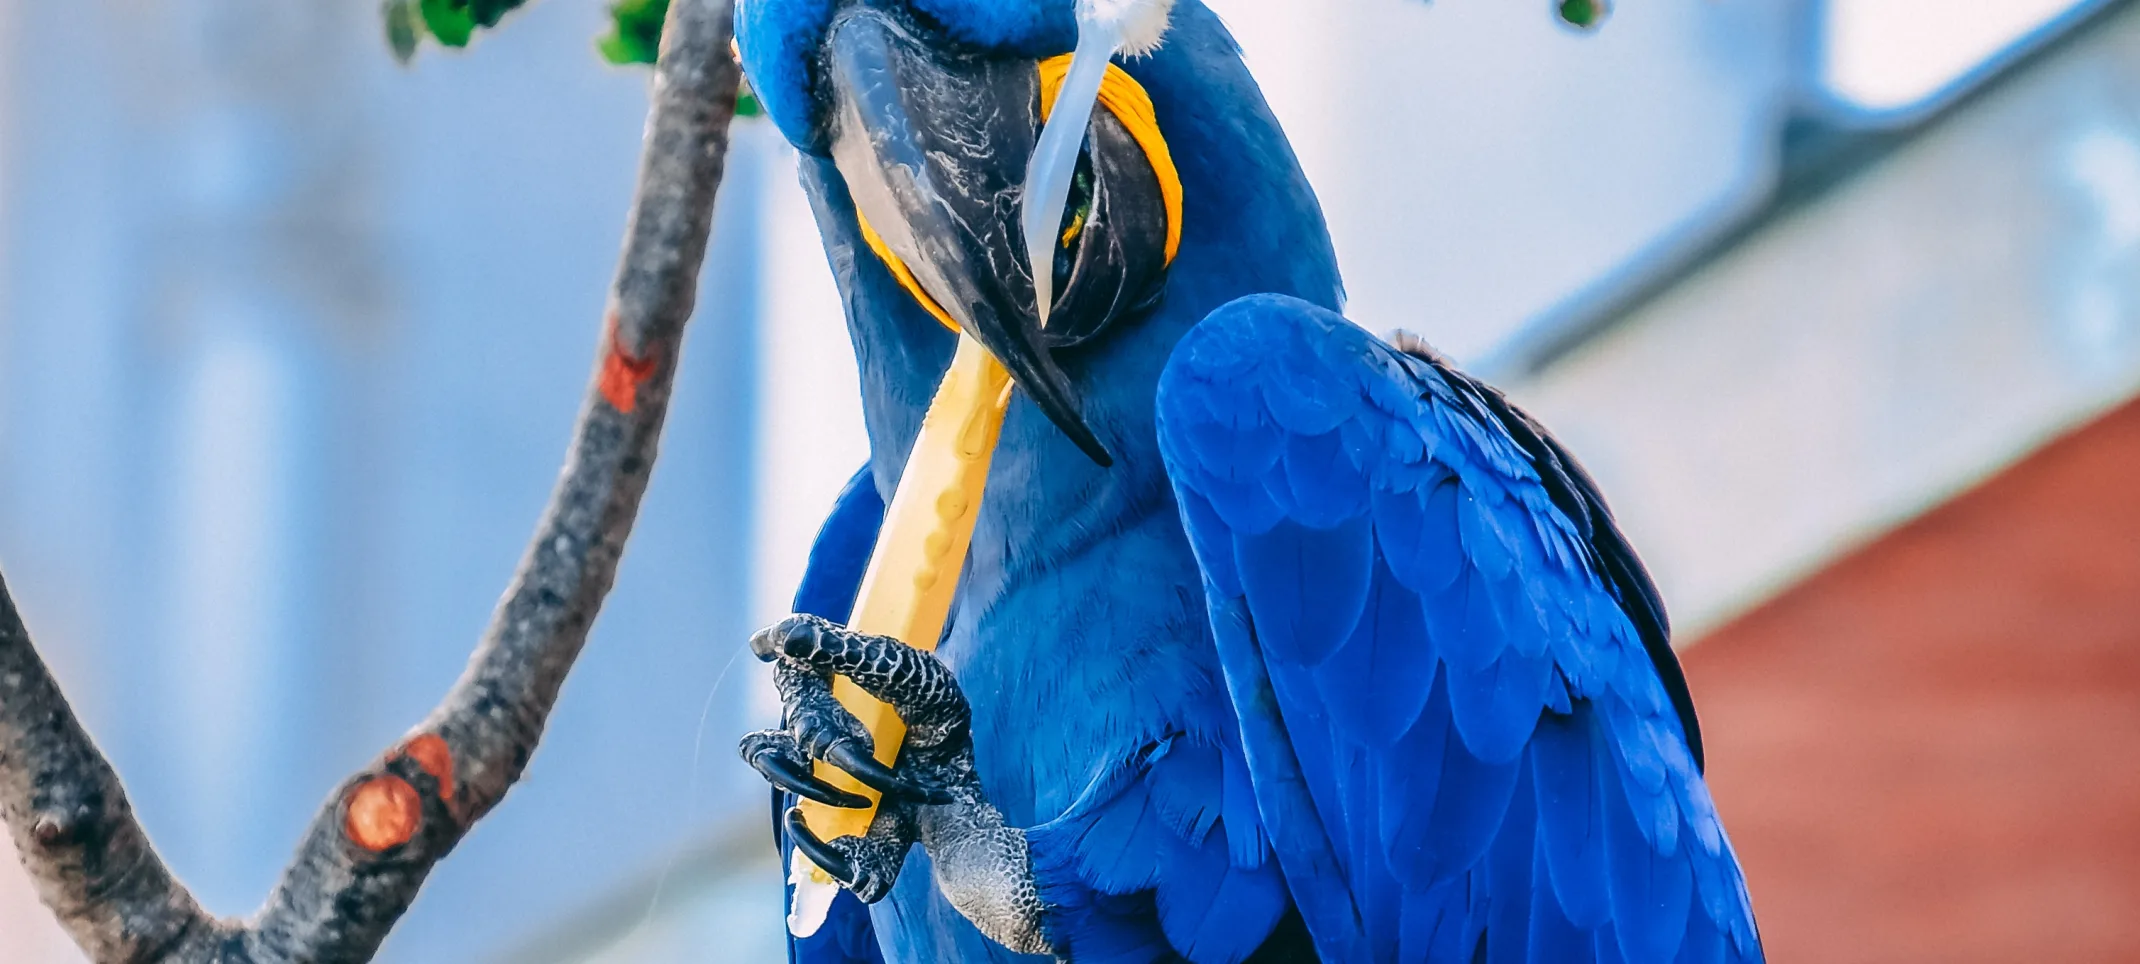 Parrot holding tooth brush